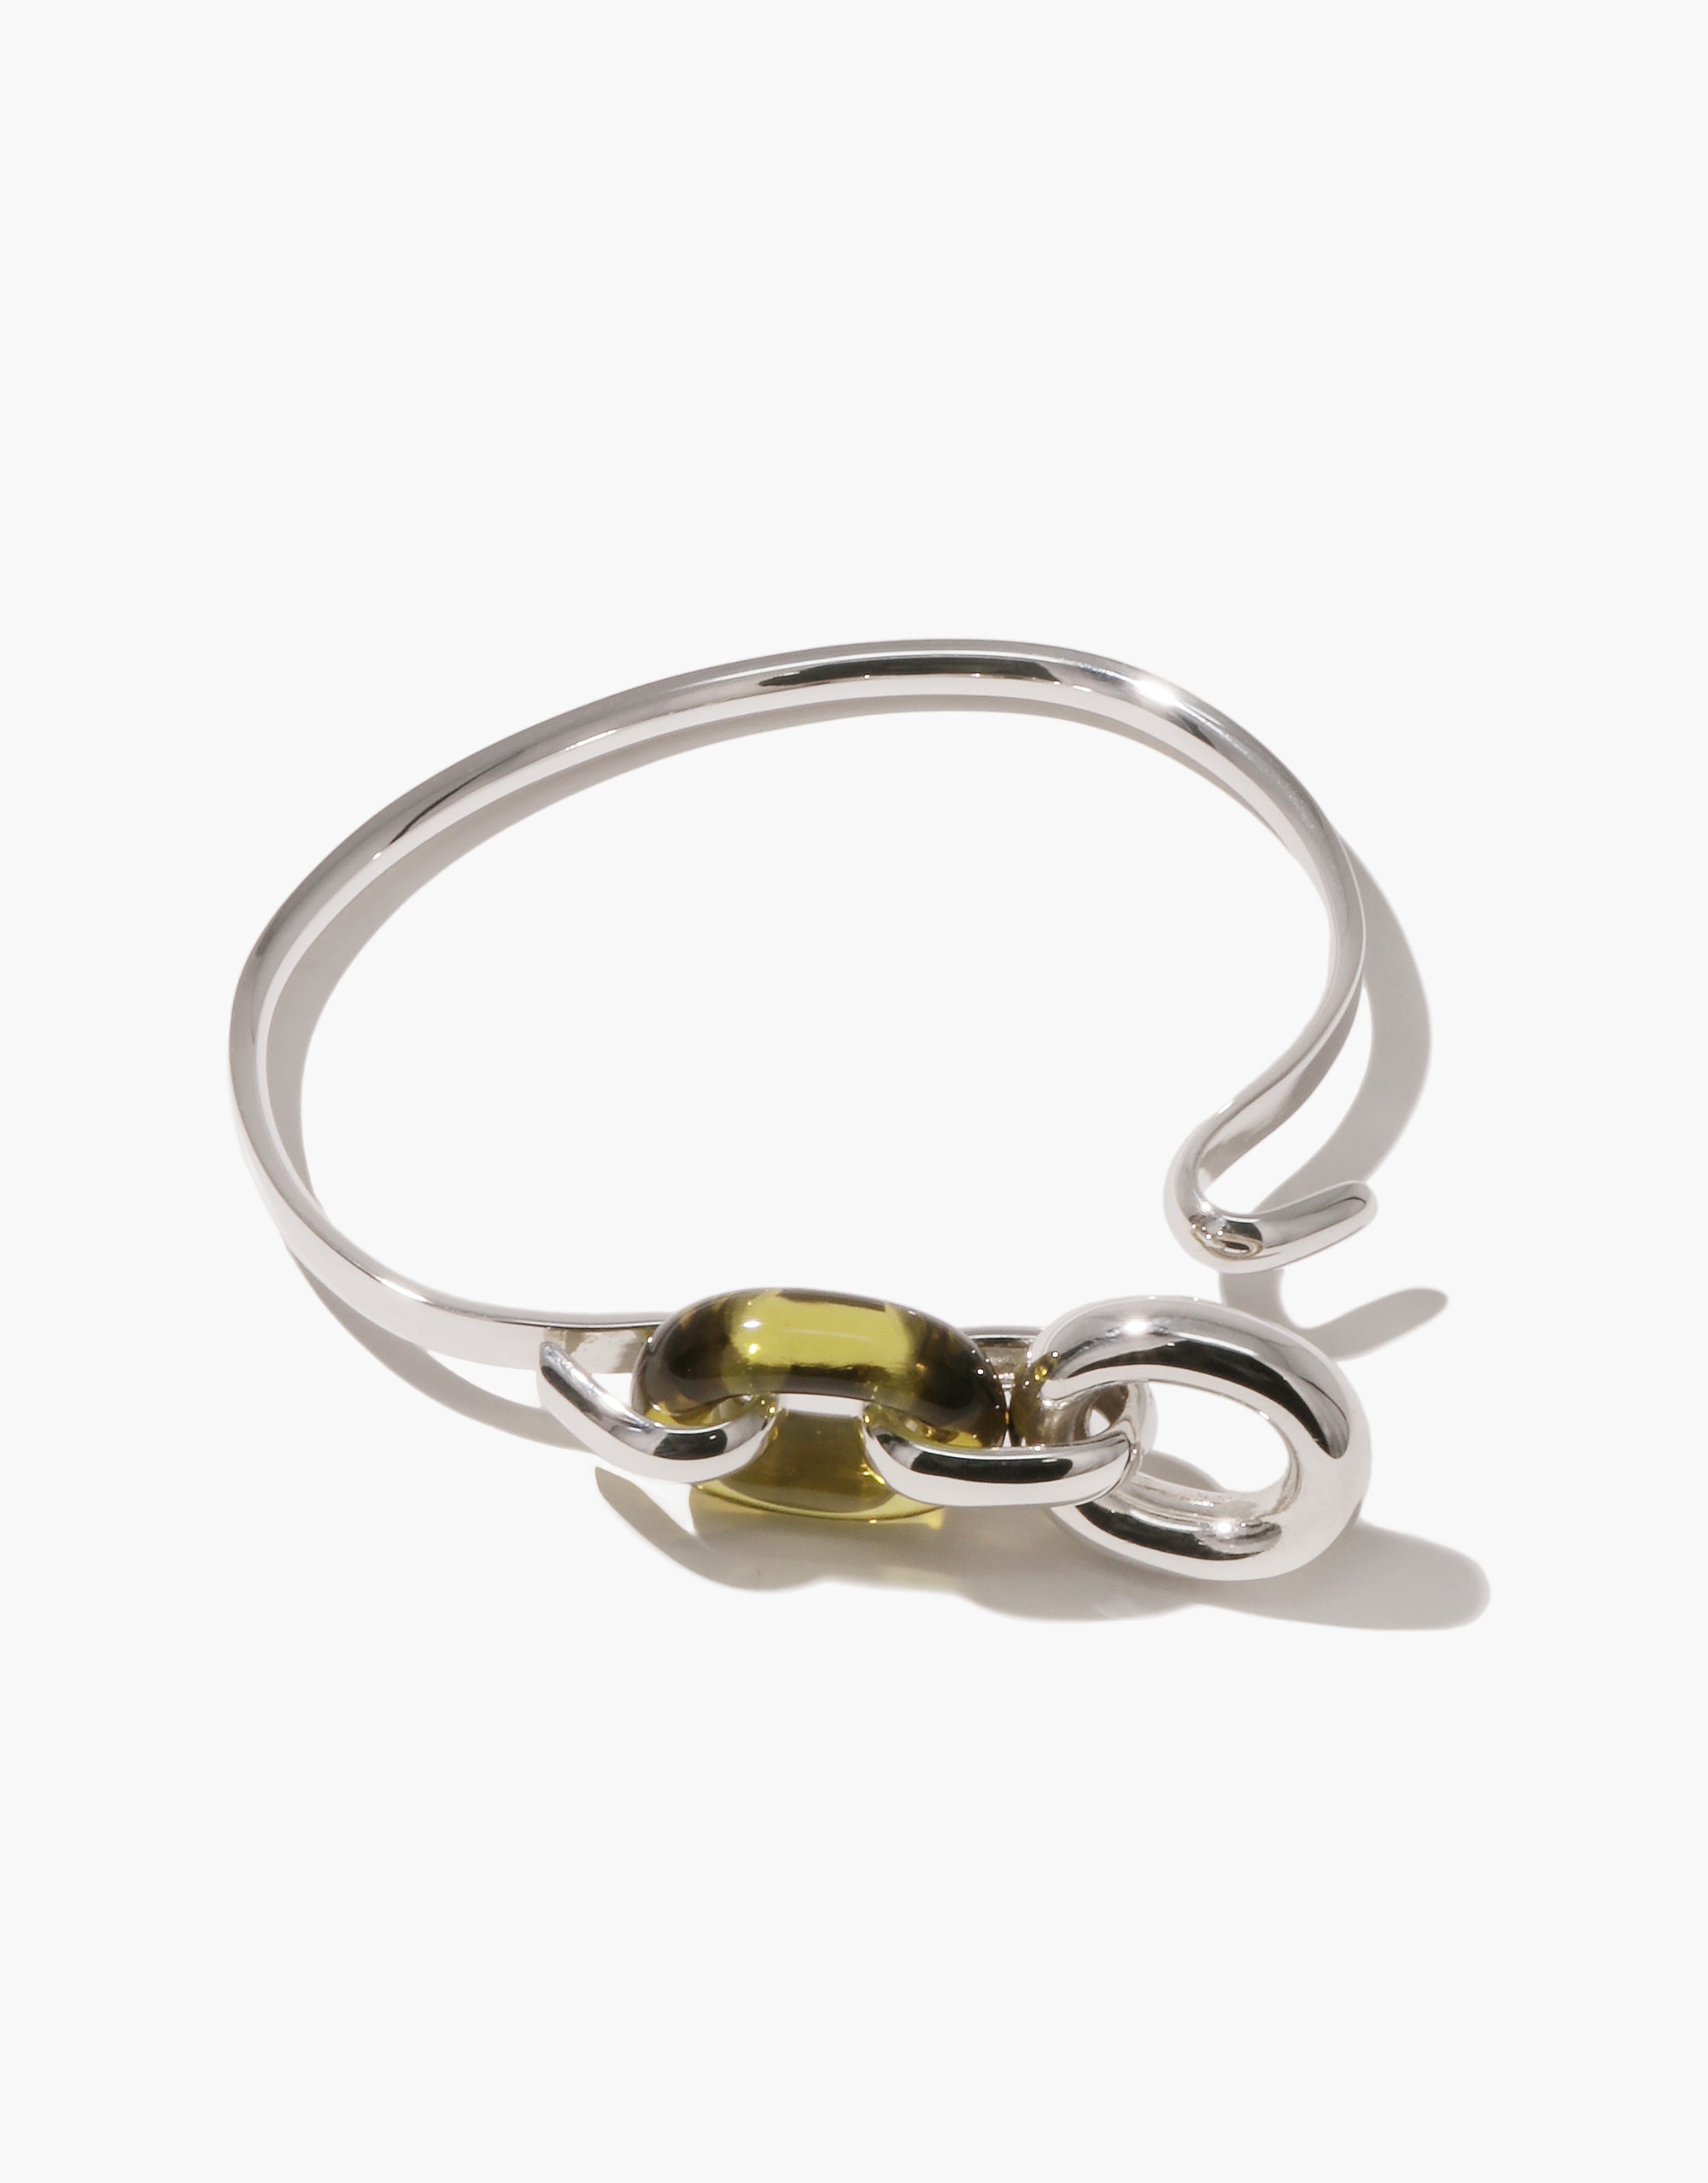 Island Hook Bracelet Handmade in Sterling Silver With Yellow Gold Vermiel 